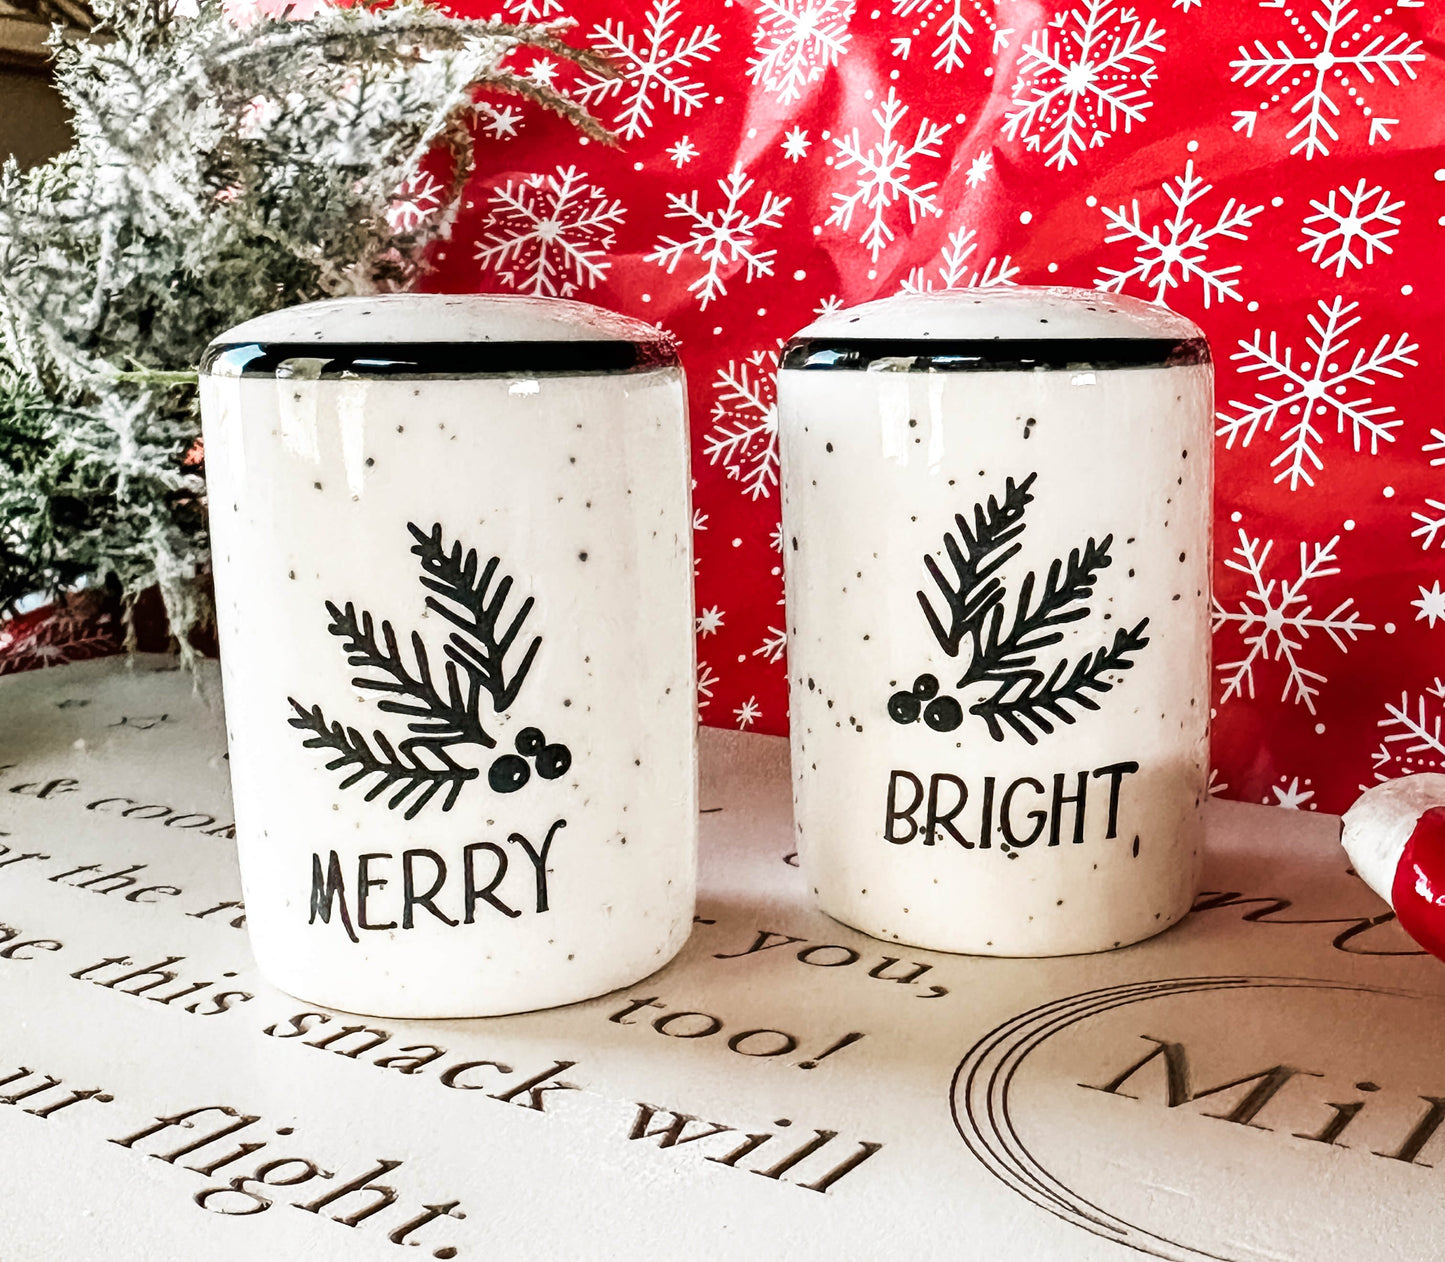 Salt and Pepper Shaker Merry Bright Black and White Christmas